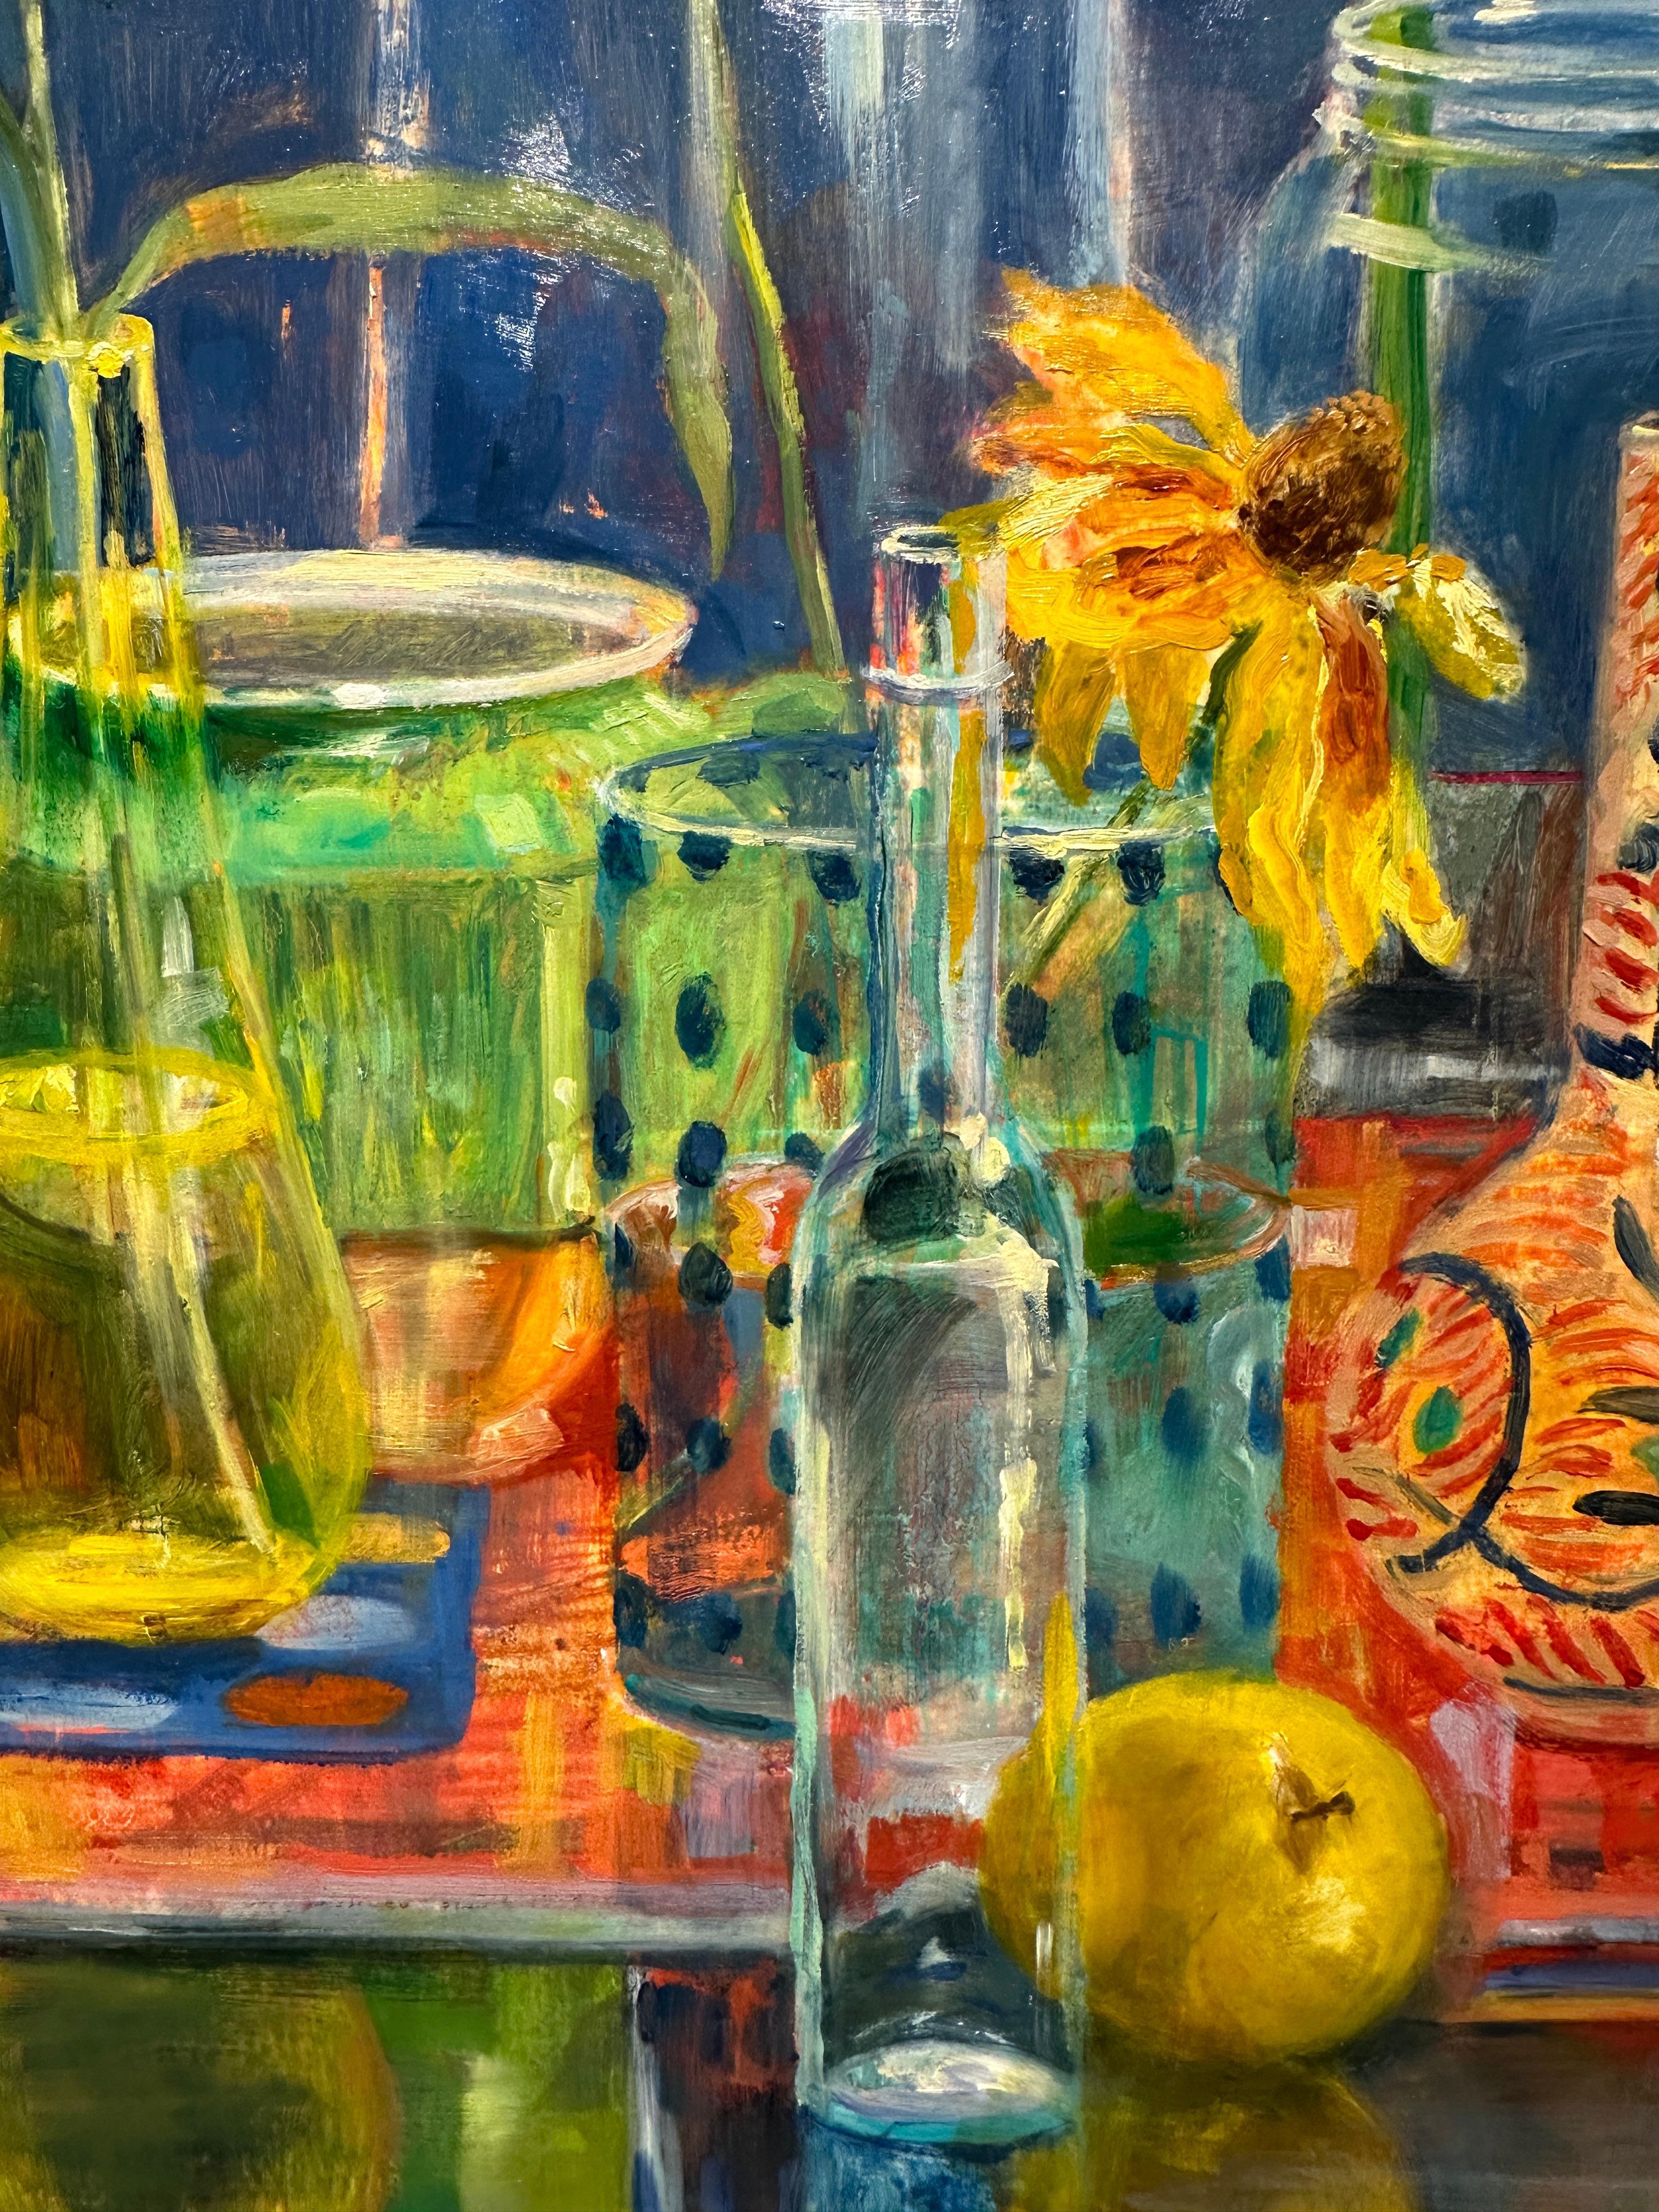 Ontario Summer Painting - Colorful Impressionist Still Life, Oil Painting For Sale 2